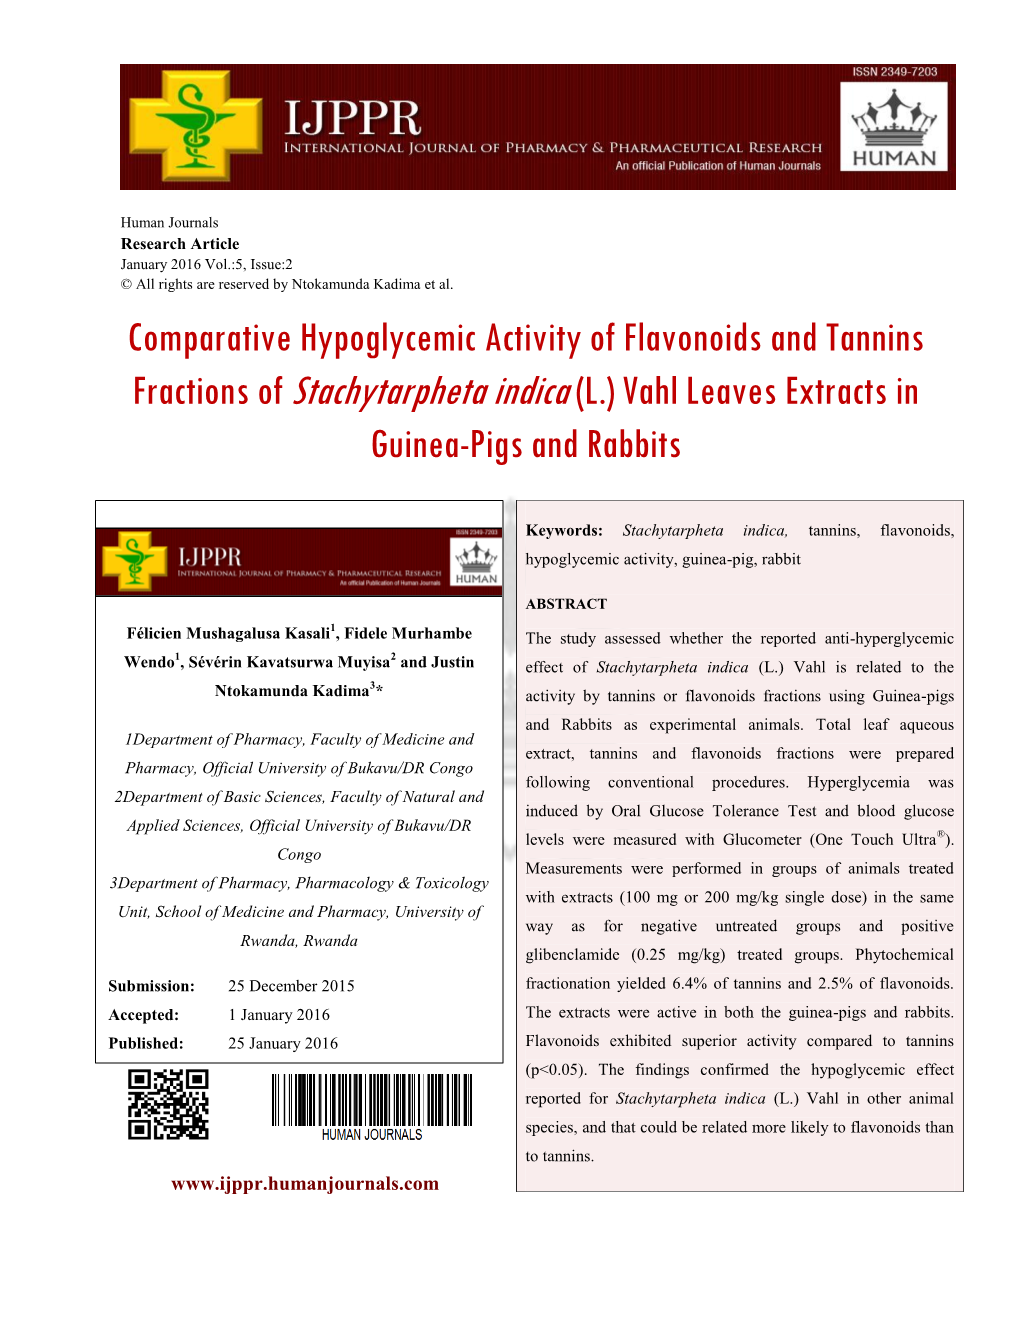 Comparative Hypoglycemic Activity of Flavonoids and Tannins Fractions of Stachytarpheta Indica (L.) Vahl Leaves Extracts in Guinea-Pigs and Rabbits